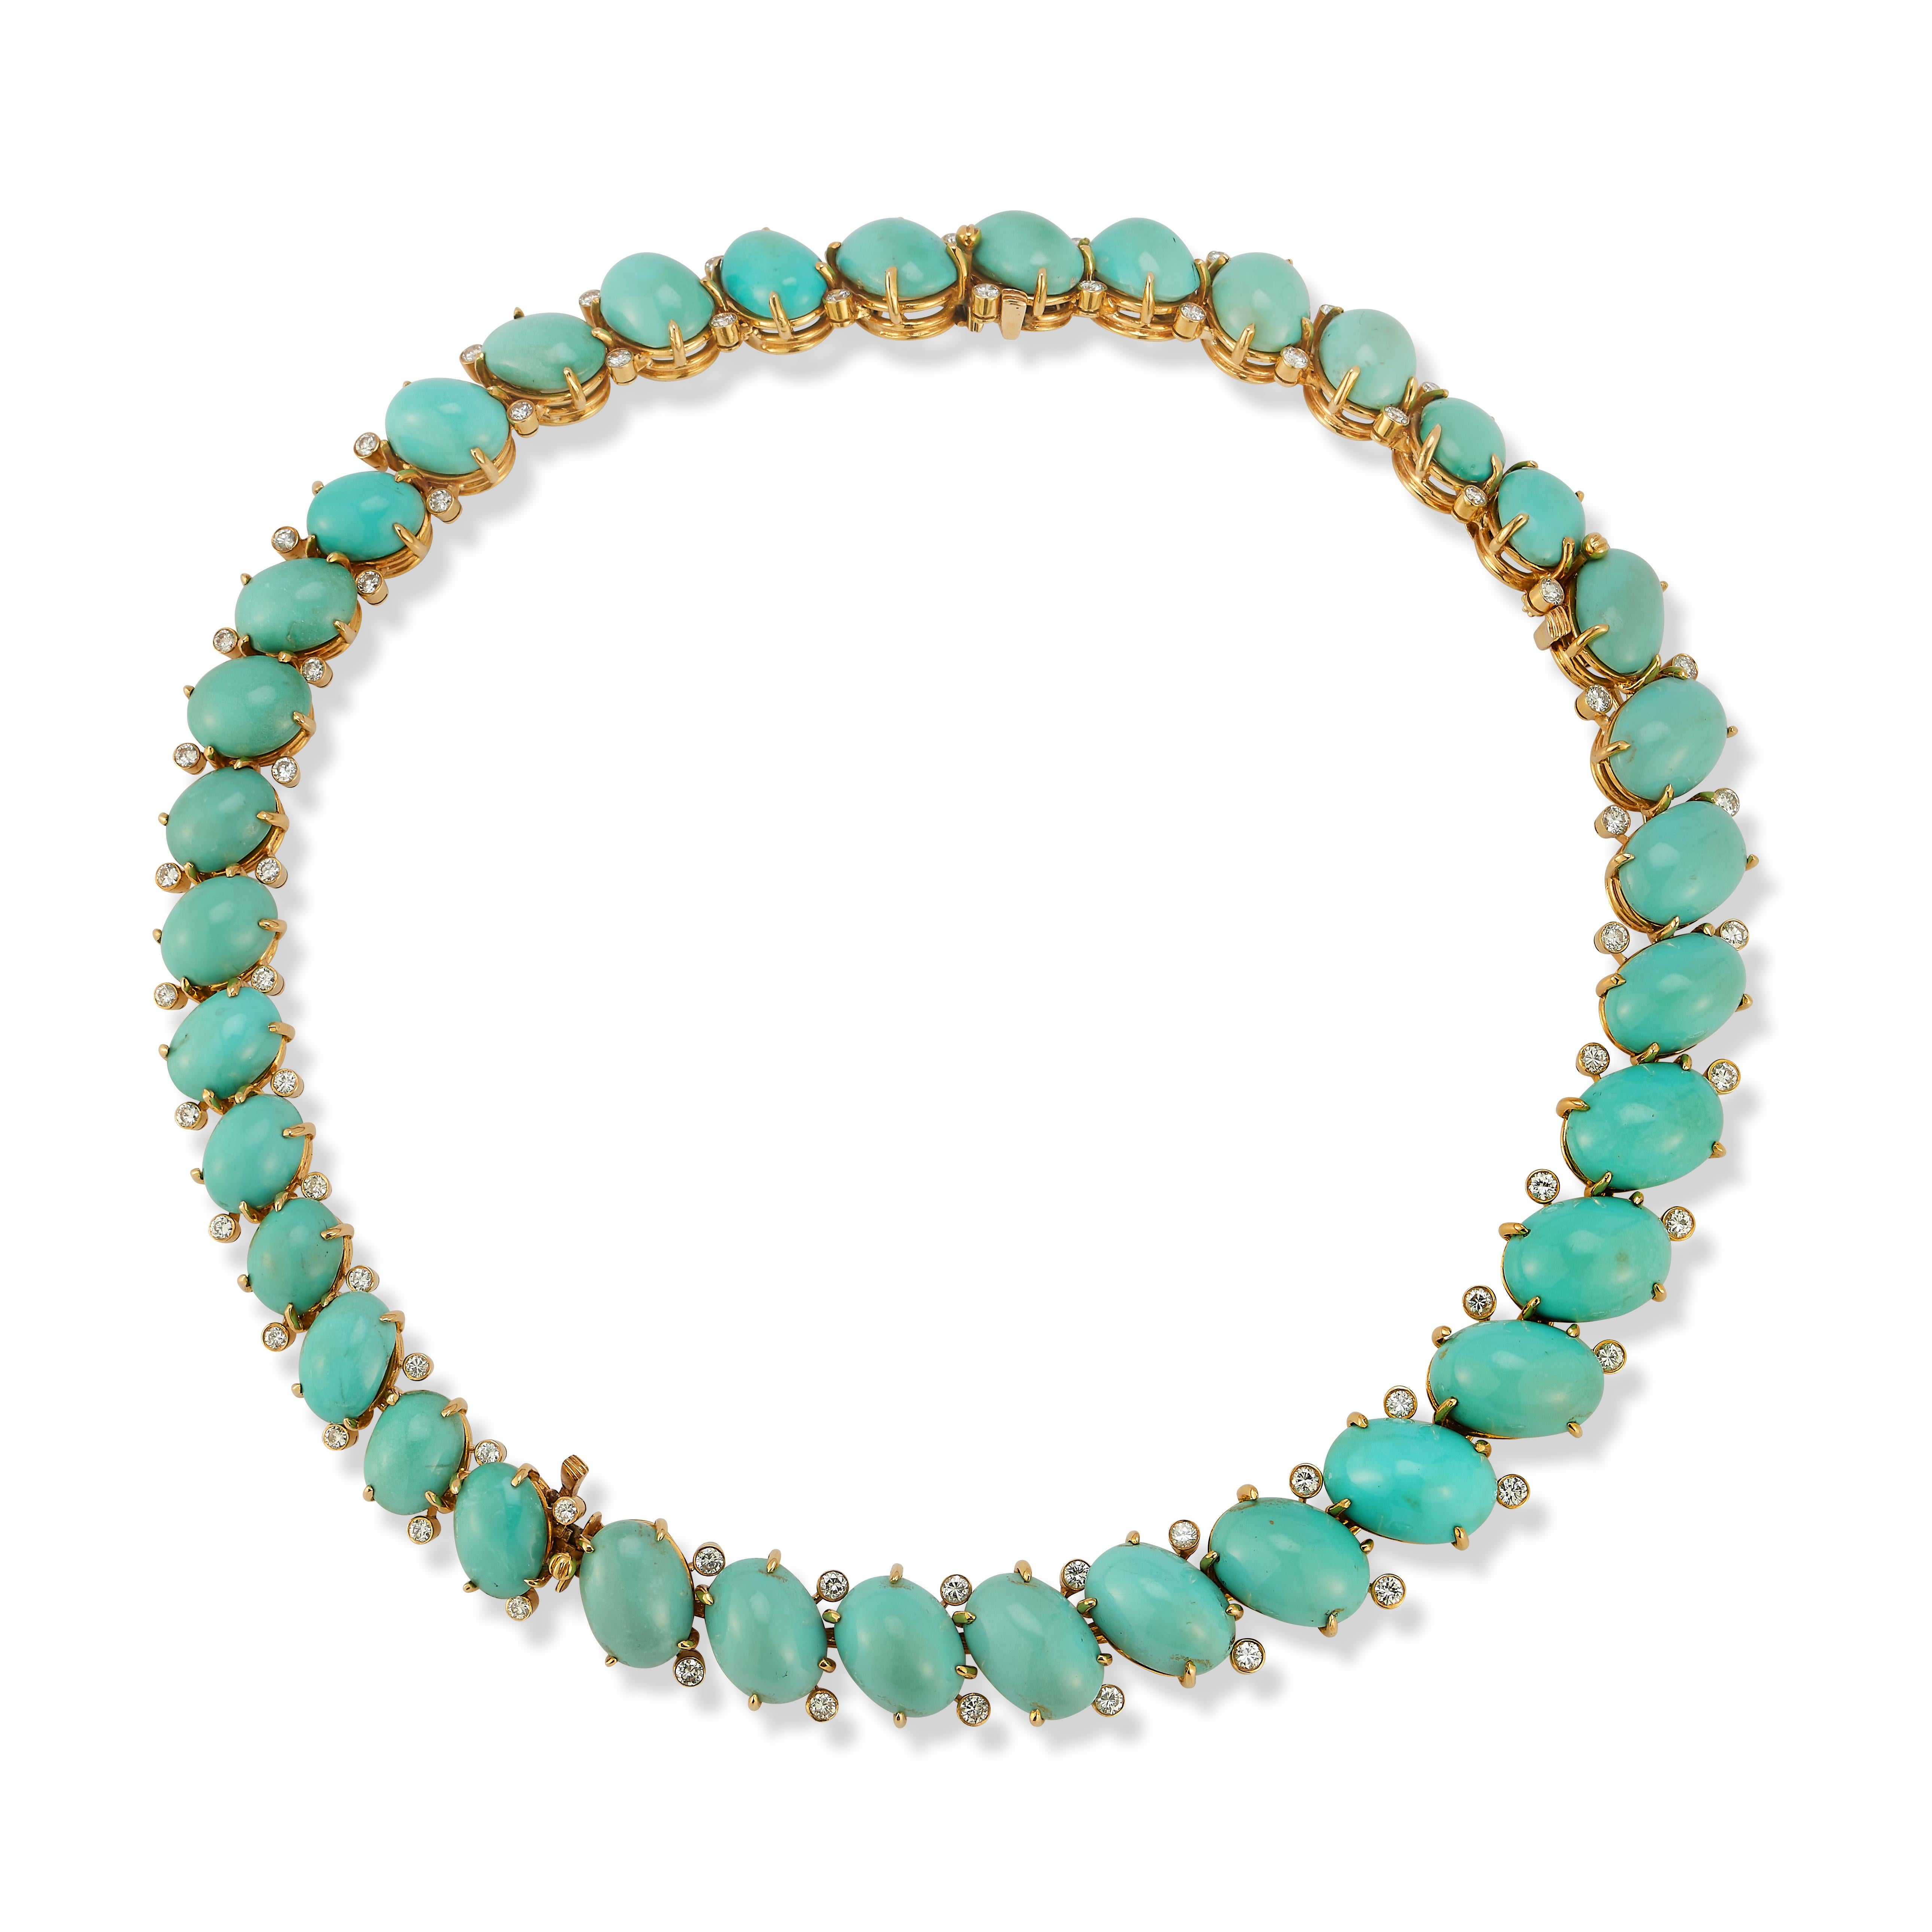 Van Cleef & Arpels Turquoise & Diamond Convertible Necklace

An 18 karat yellow gold necklace set with cabochon turquoise and round cut diamonds. The necklace is made of 3 sections and can be separated into a pair of bracelets and an